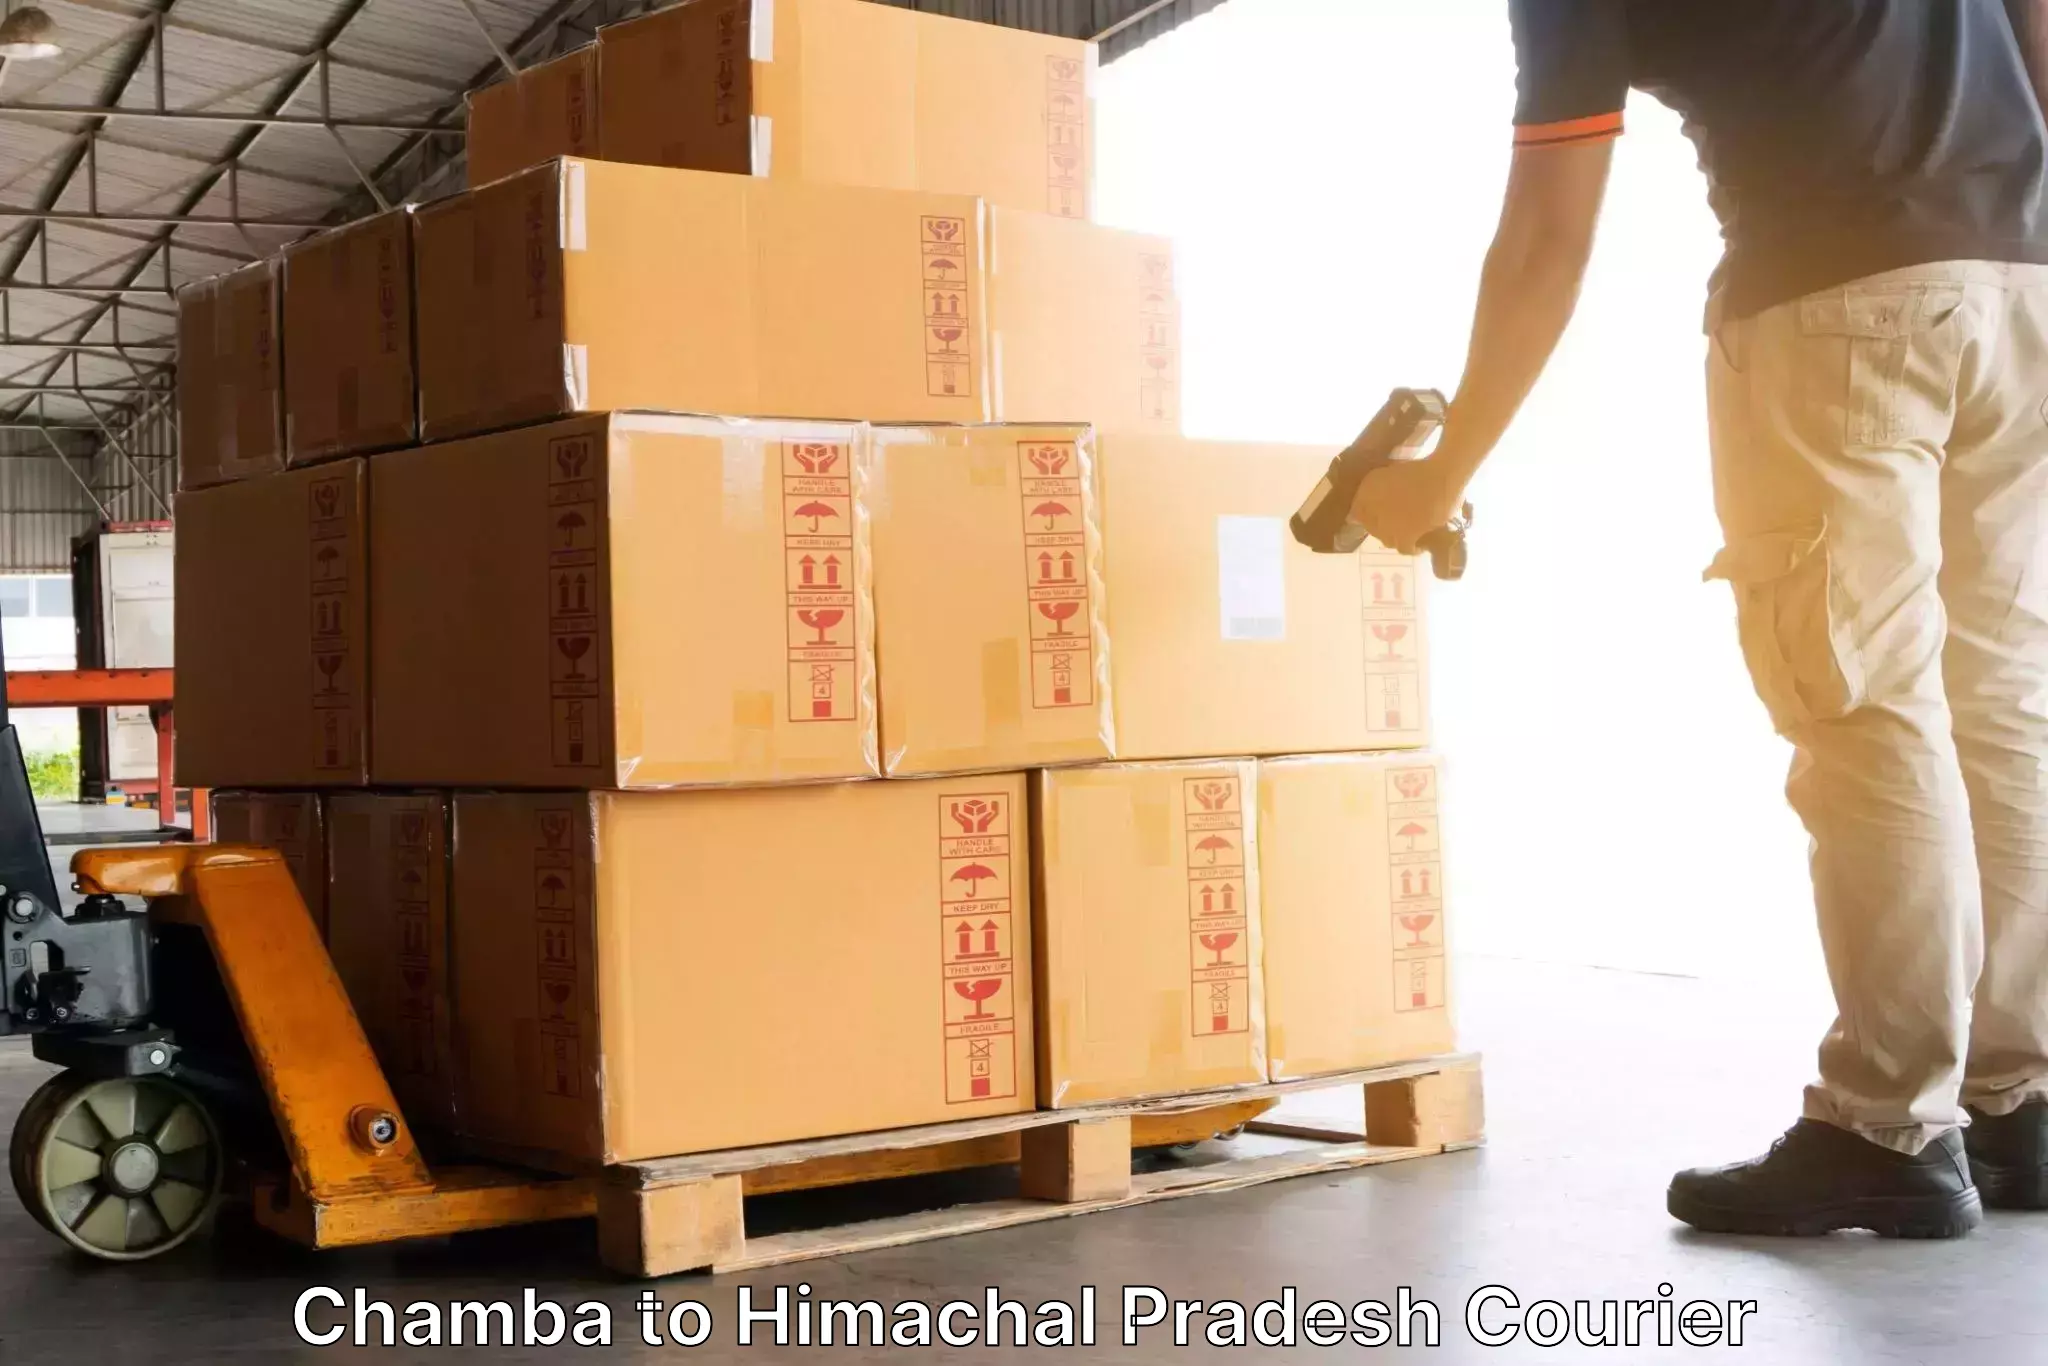 Round-the-clock parcel delivery in Chamba to Sirmaur